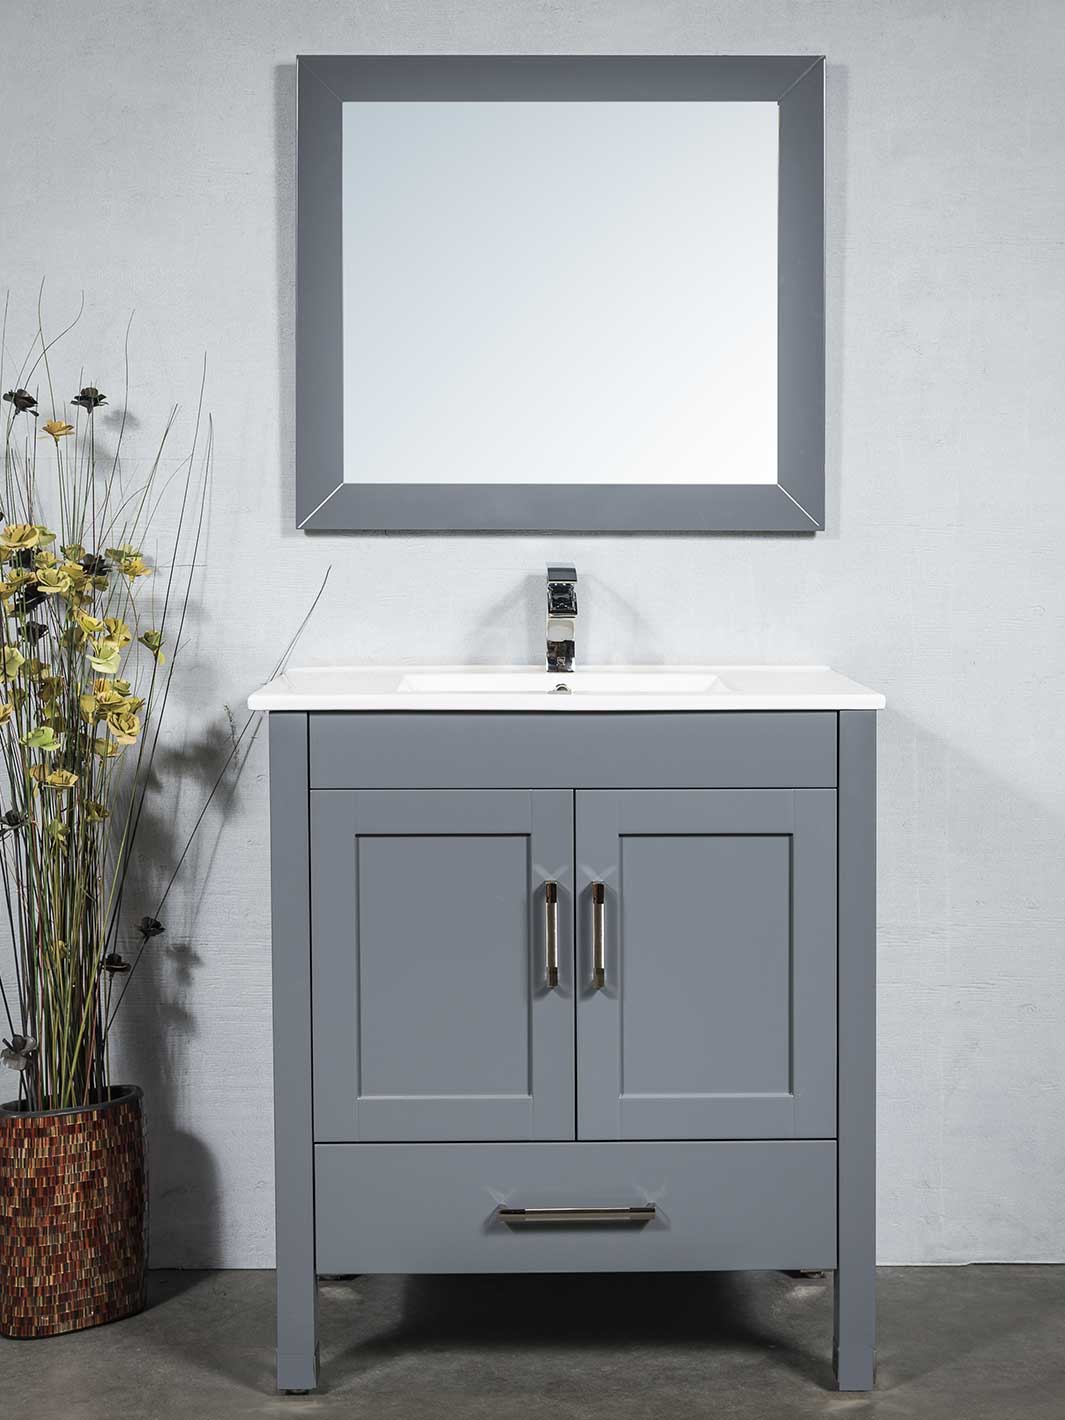 grey vanity with grey framed mirror, white ceramic sink, and chrome faucet